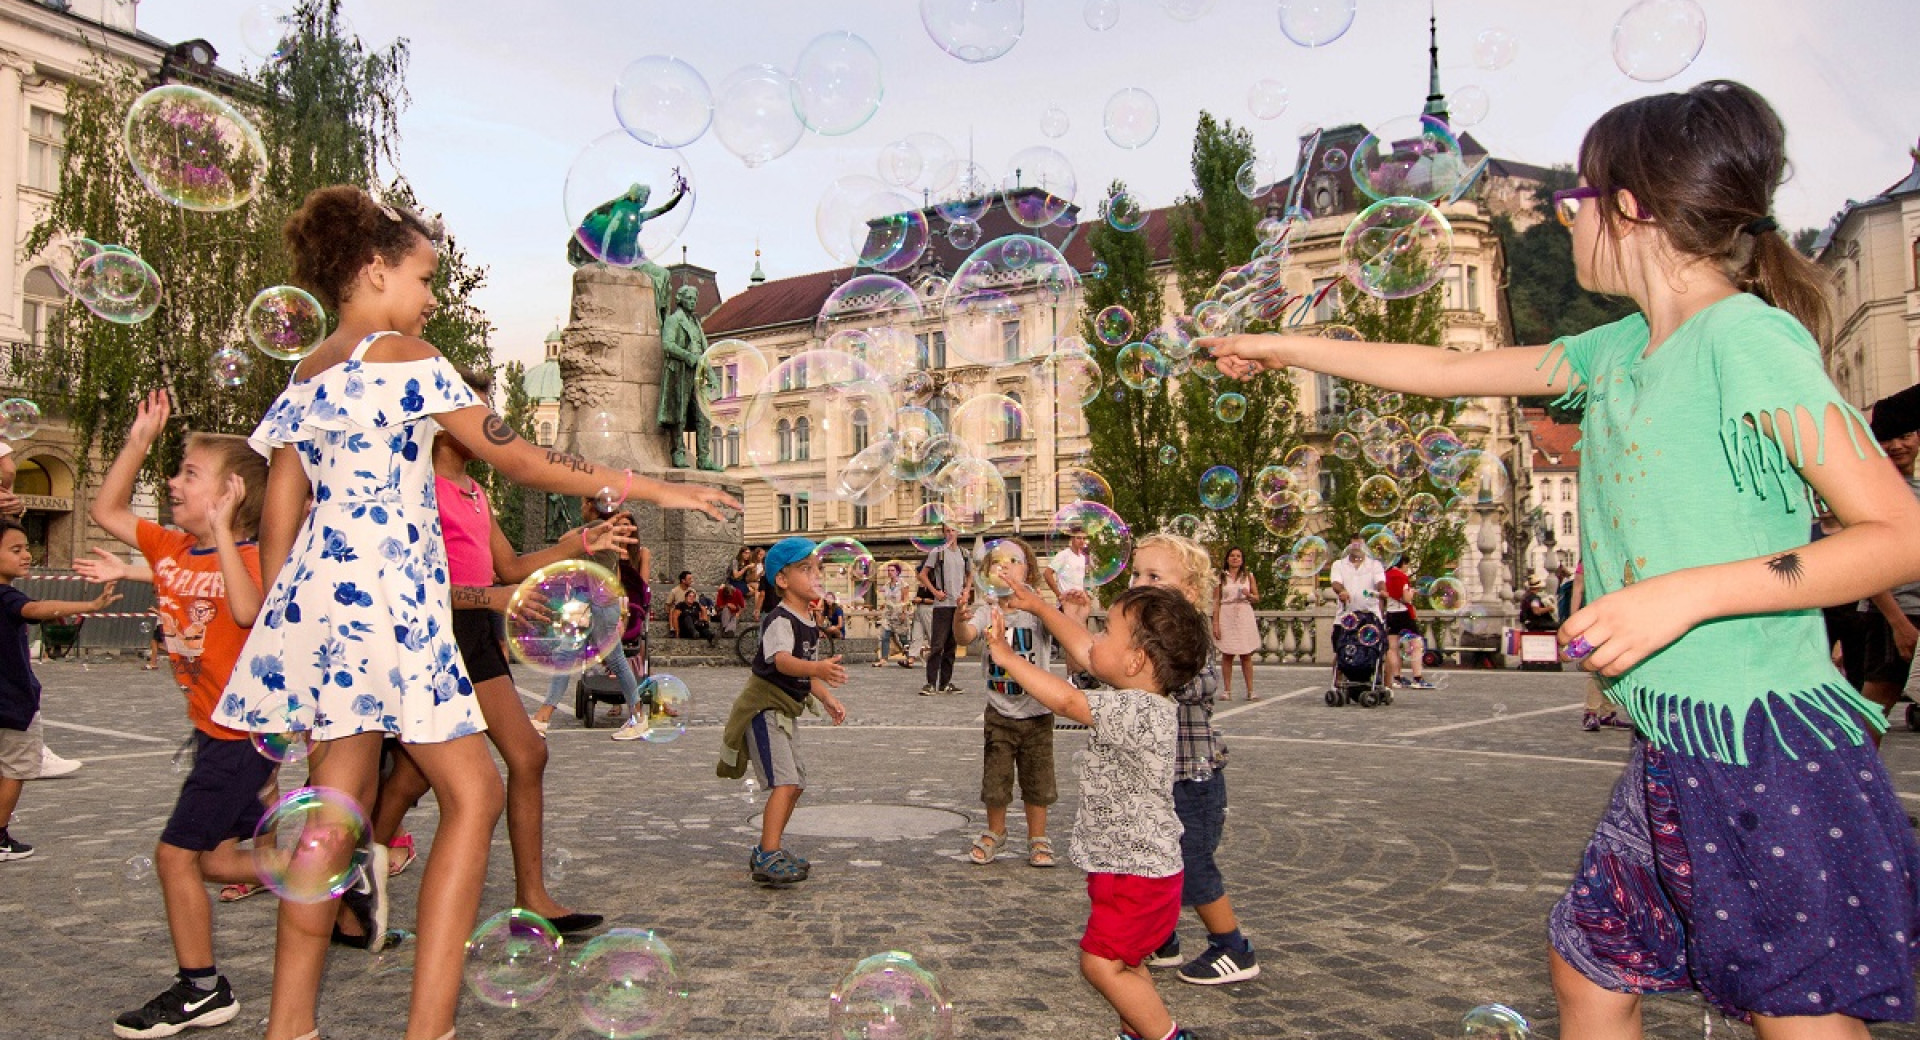 Children of different age are catching bubbles in the city square.